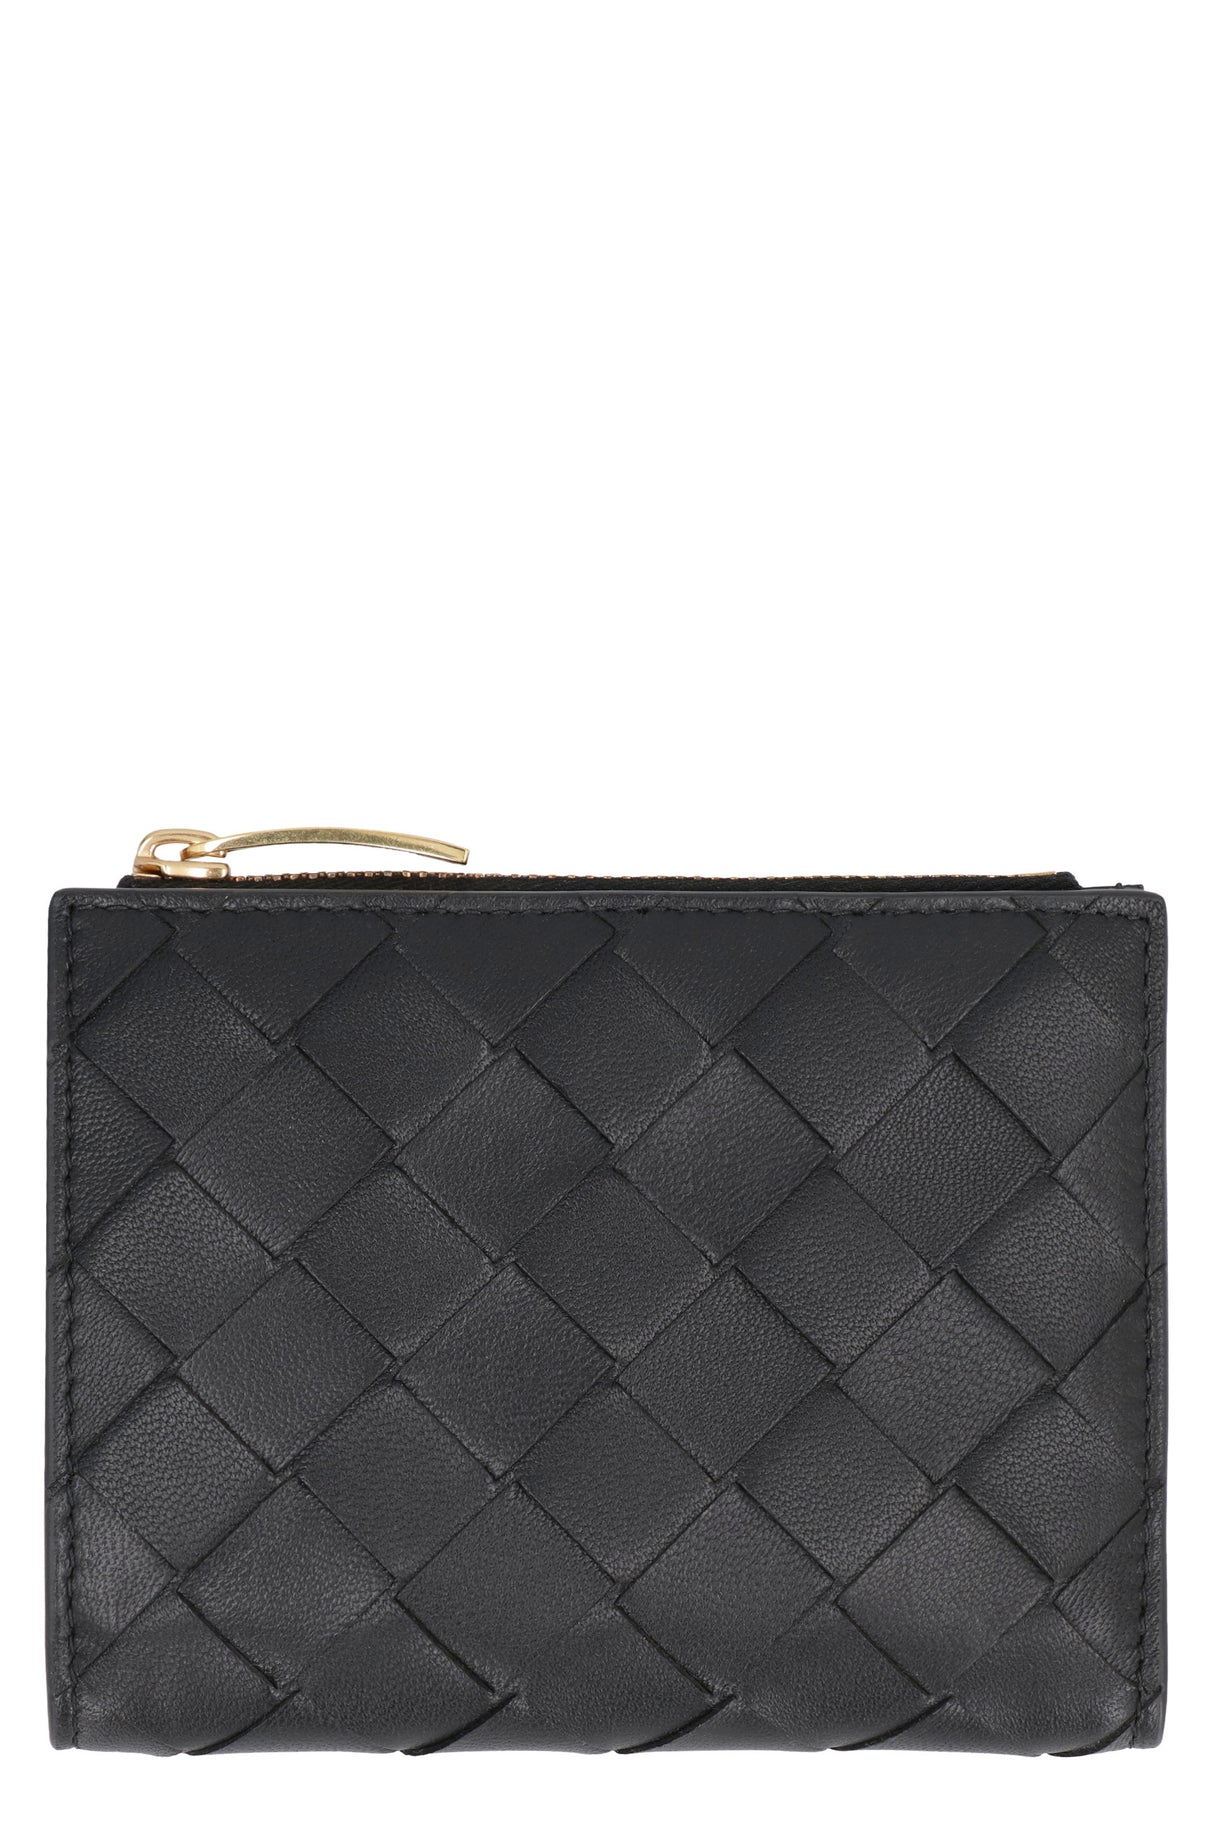 Stylish Black Leather Wallet with Intrecciato Pattern for Women